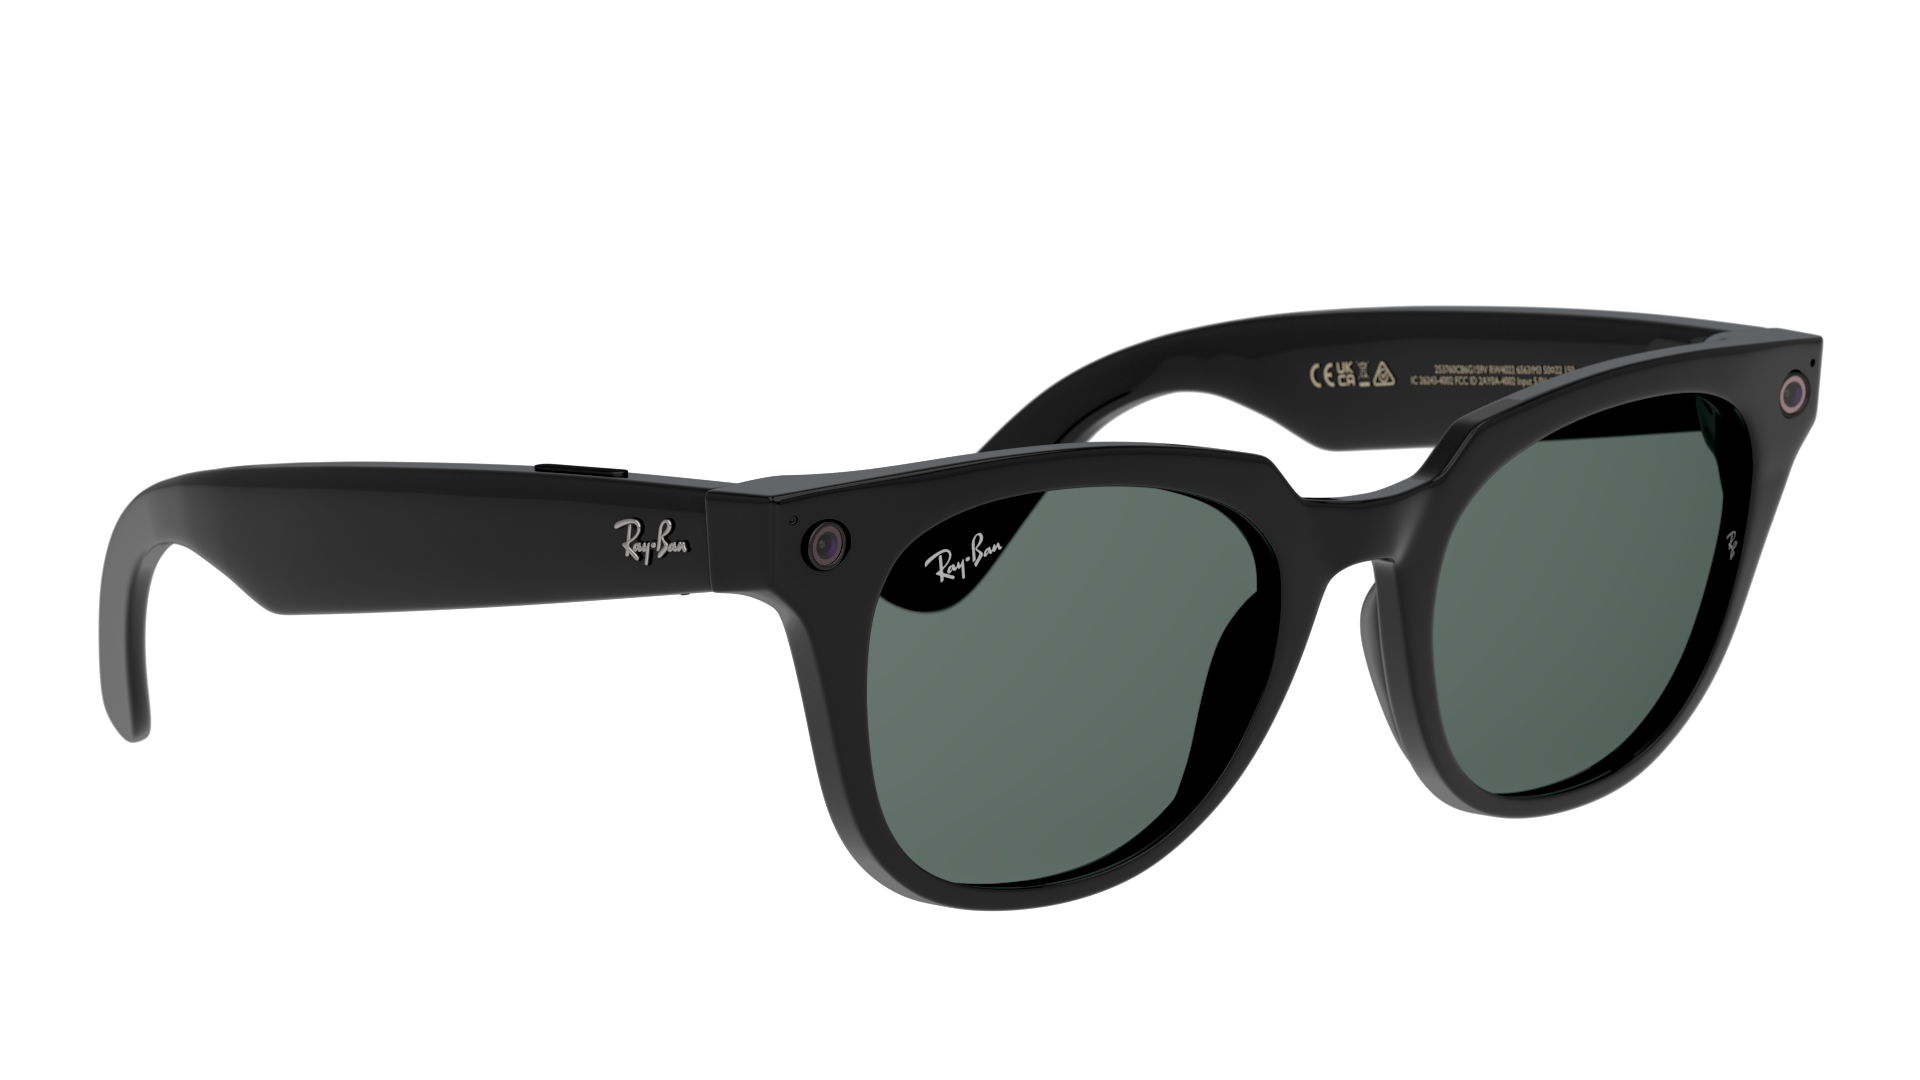 Angle_Right01 Ray Ban Stories 0RW4005 601/71 Verde / Negro